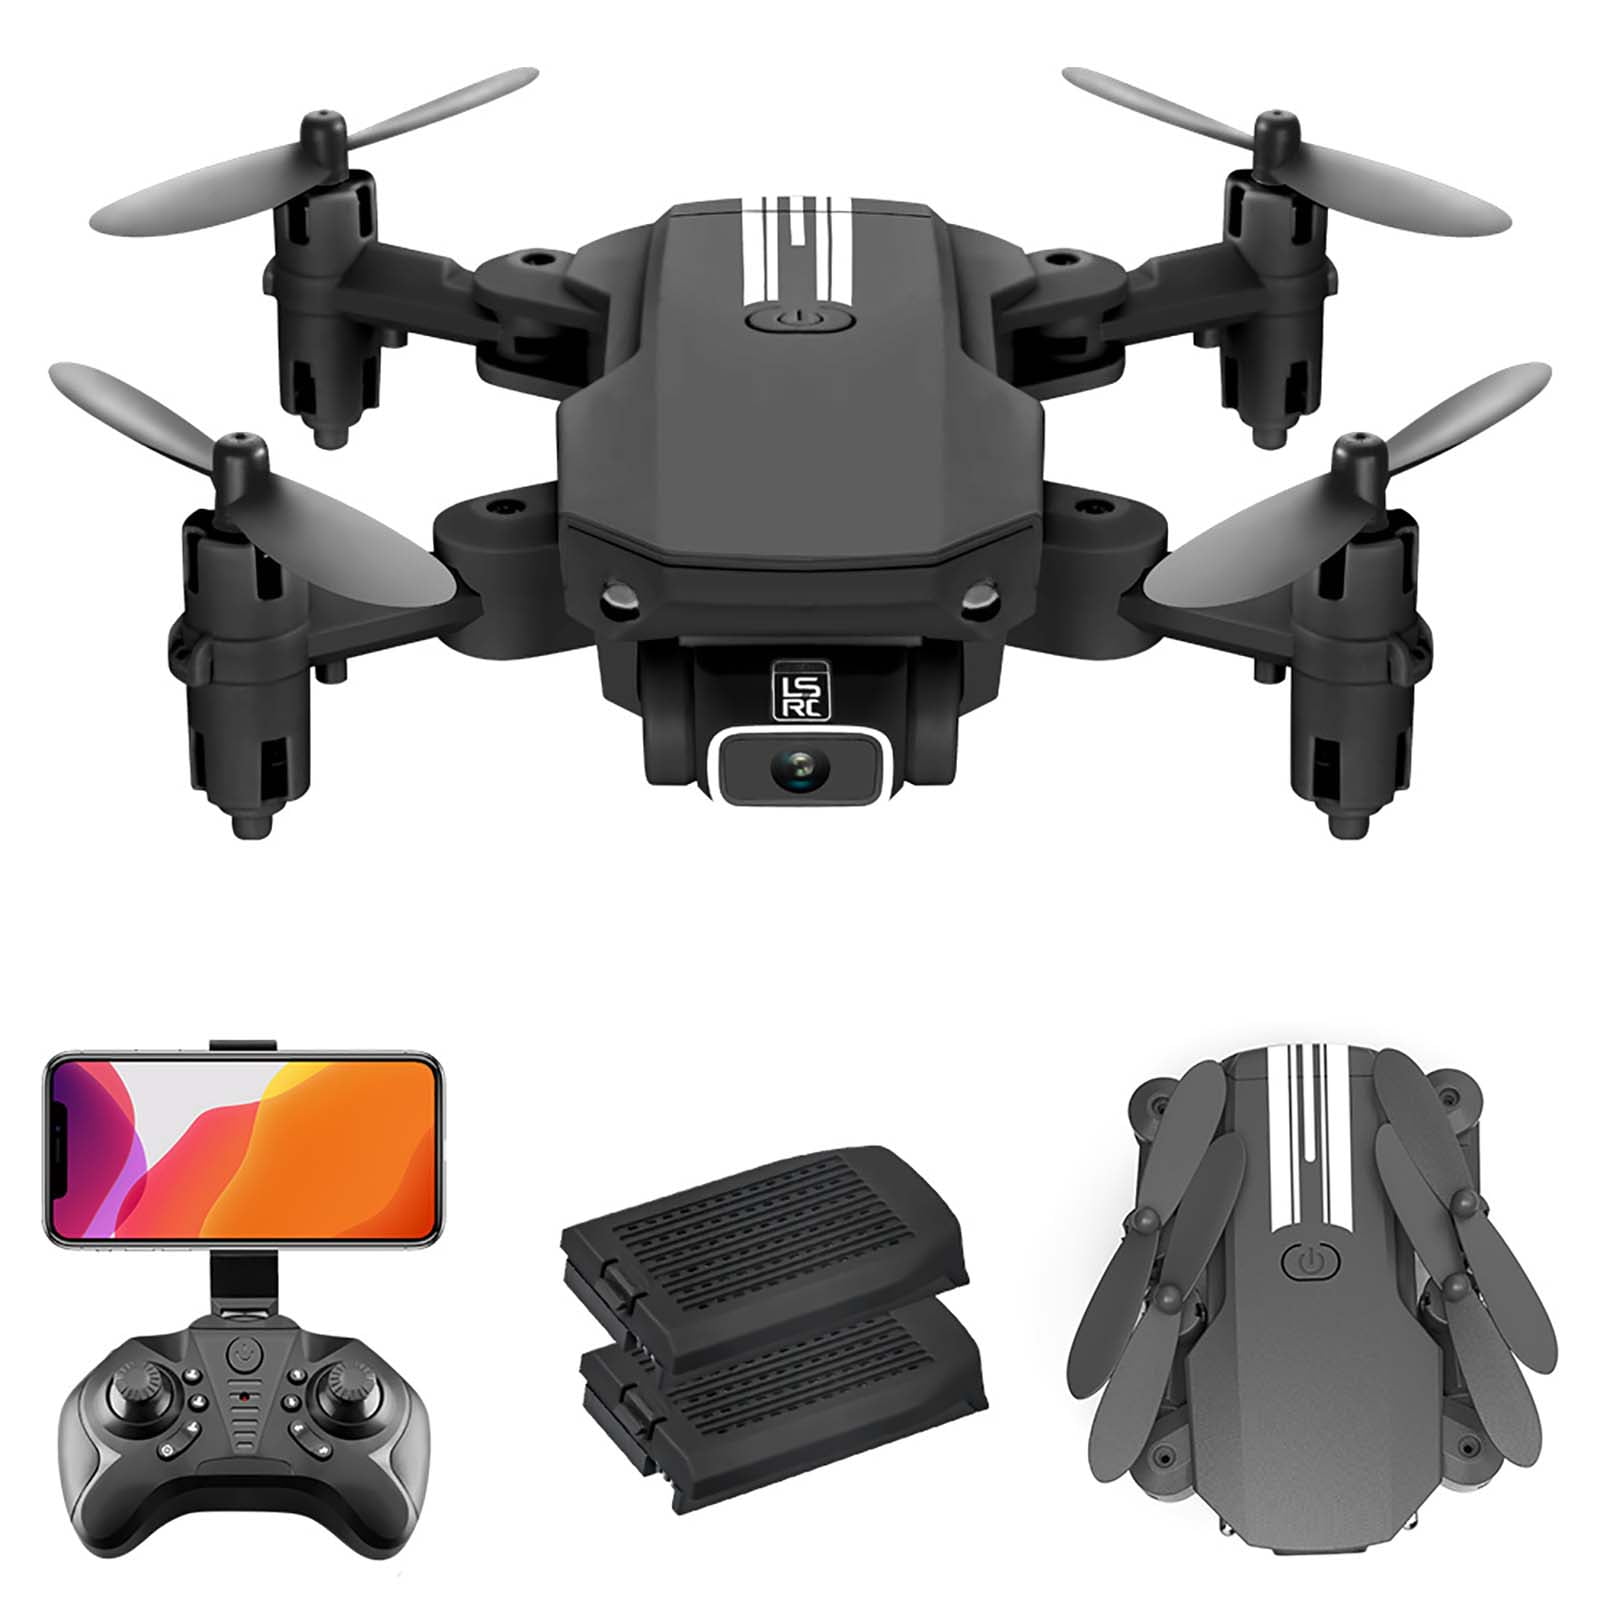 ATOYX Foldable Drone with 720P HD Camera Black Altitude Hold AT-146 WiFi FPV Live Video RC Quadcopter for Beginners & Kids with Gravity Sensor 3D Flips Headless Mode One Key Operation 3 Speeds 